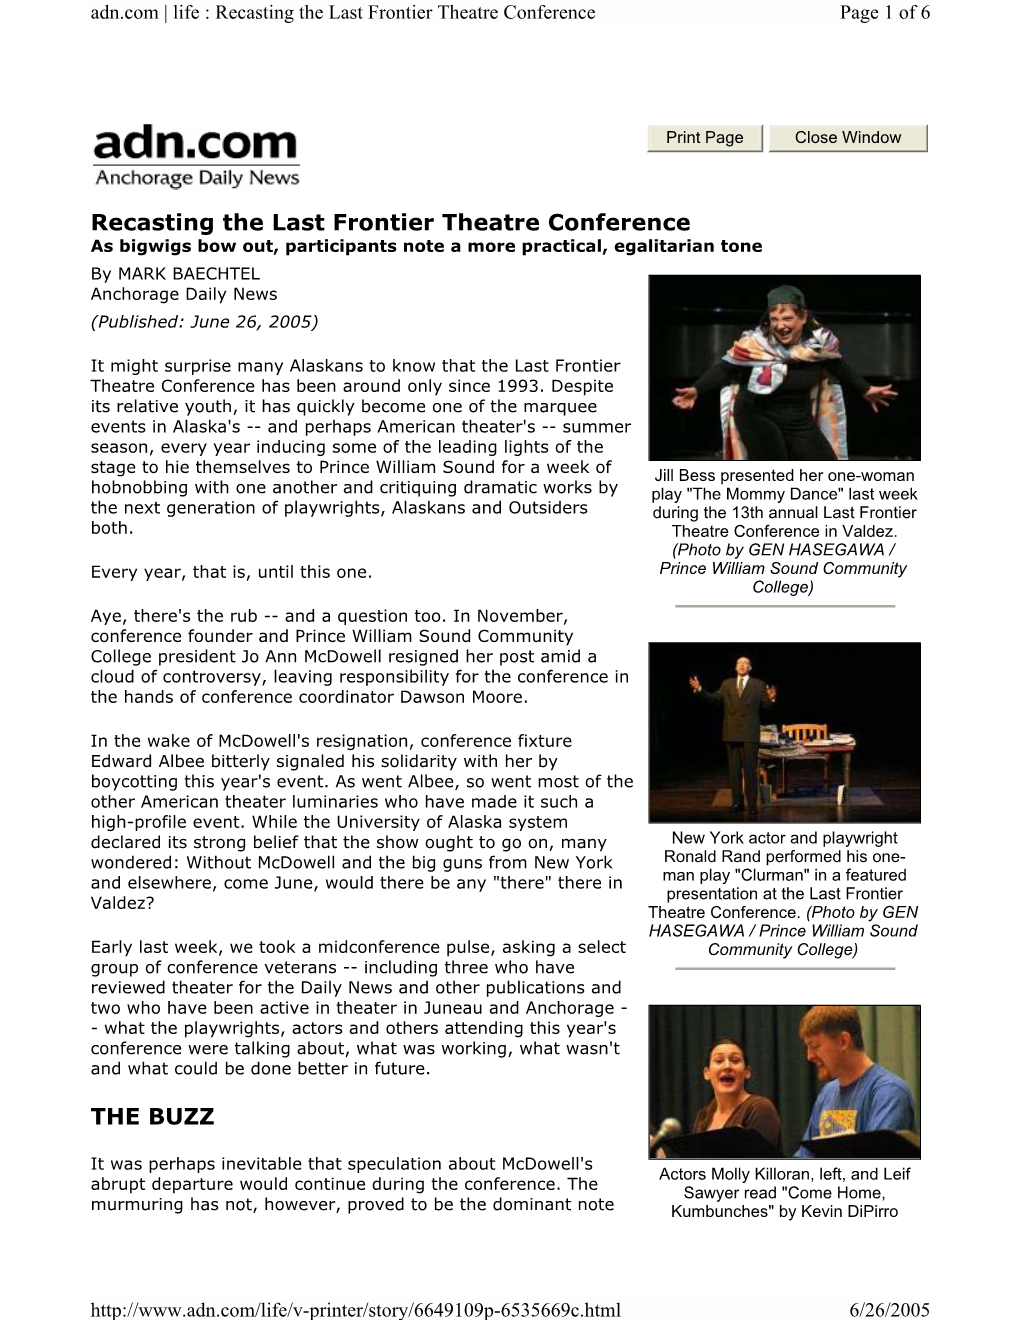 Recasting the Last Frontier Theatre Conference the BUZZ